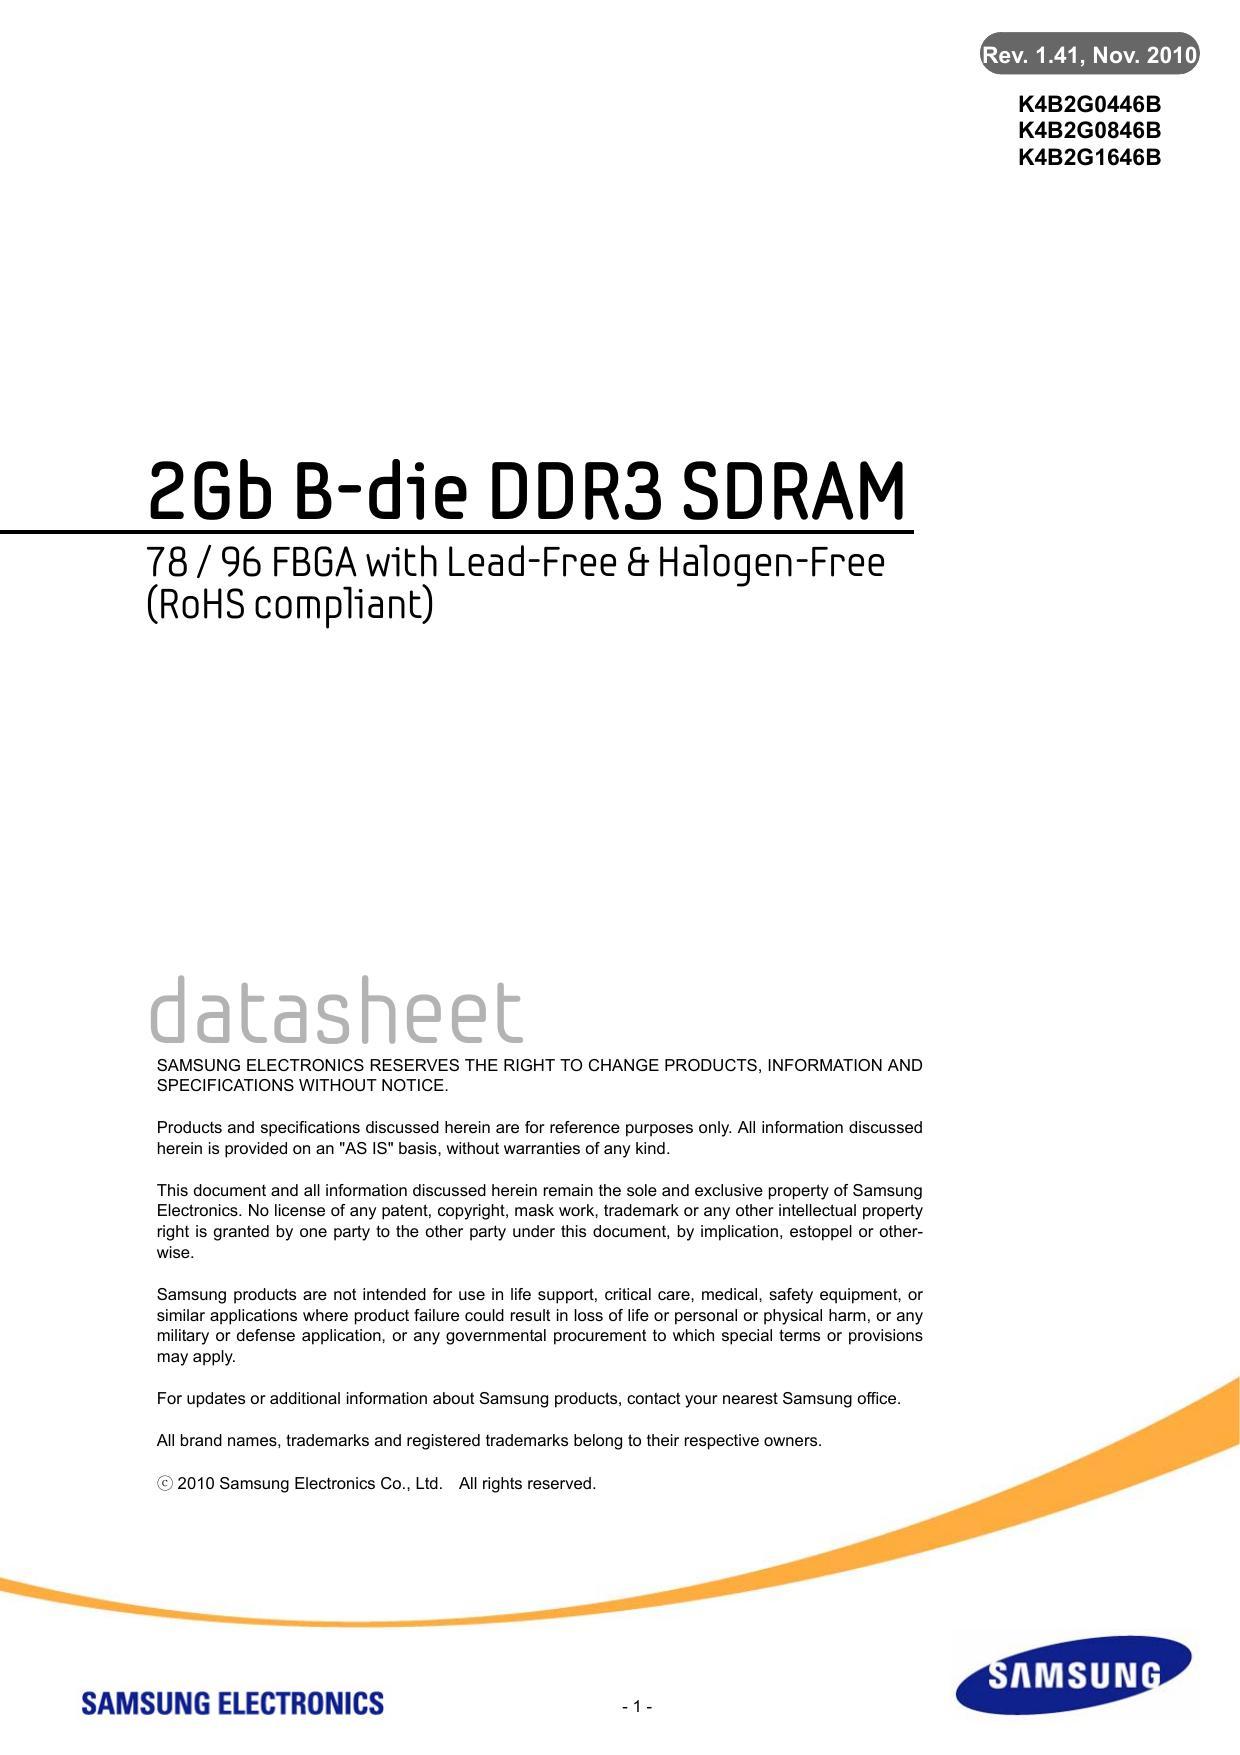 k4b2g0446b-k4b2go846b-k4b2g1646b-2gb-b-die-ddr3-sdram-7896-fbga-with-lead-free-halogen-free-rohs-compliant-datasheet.pdf